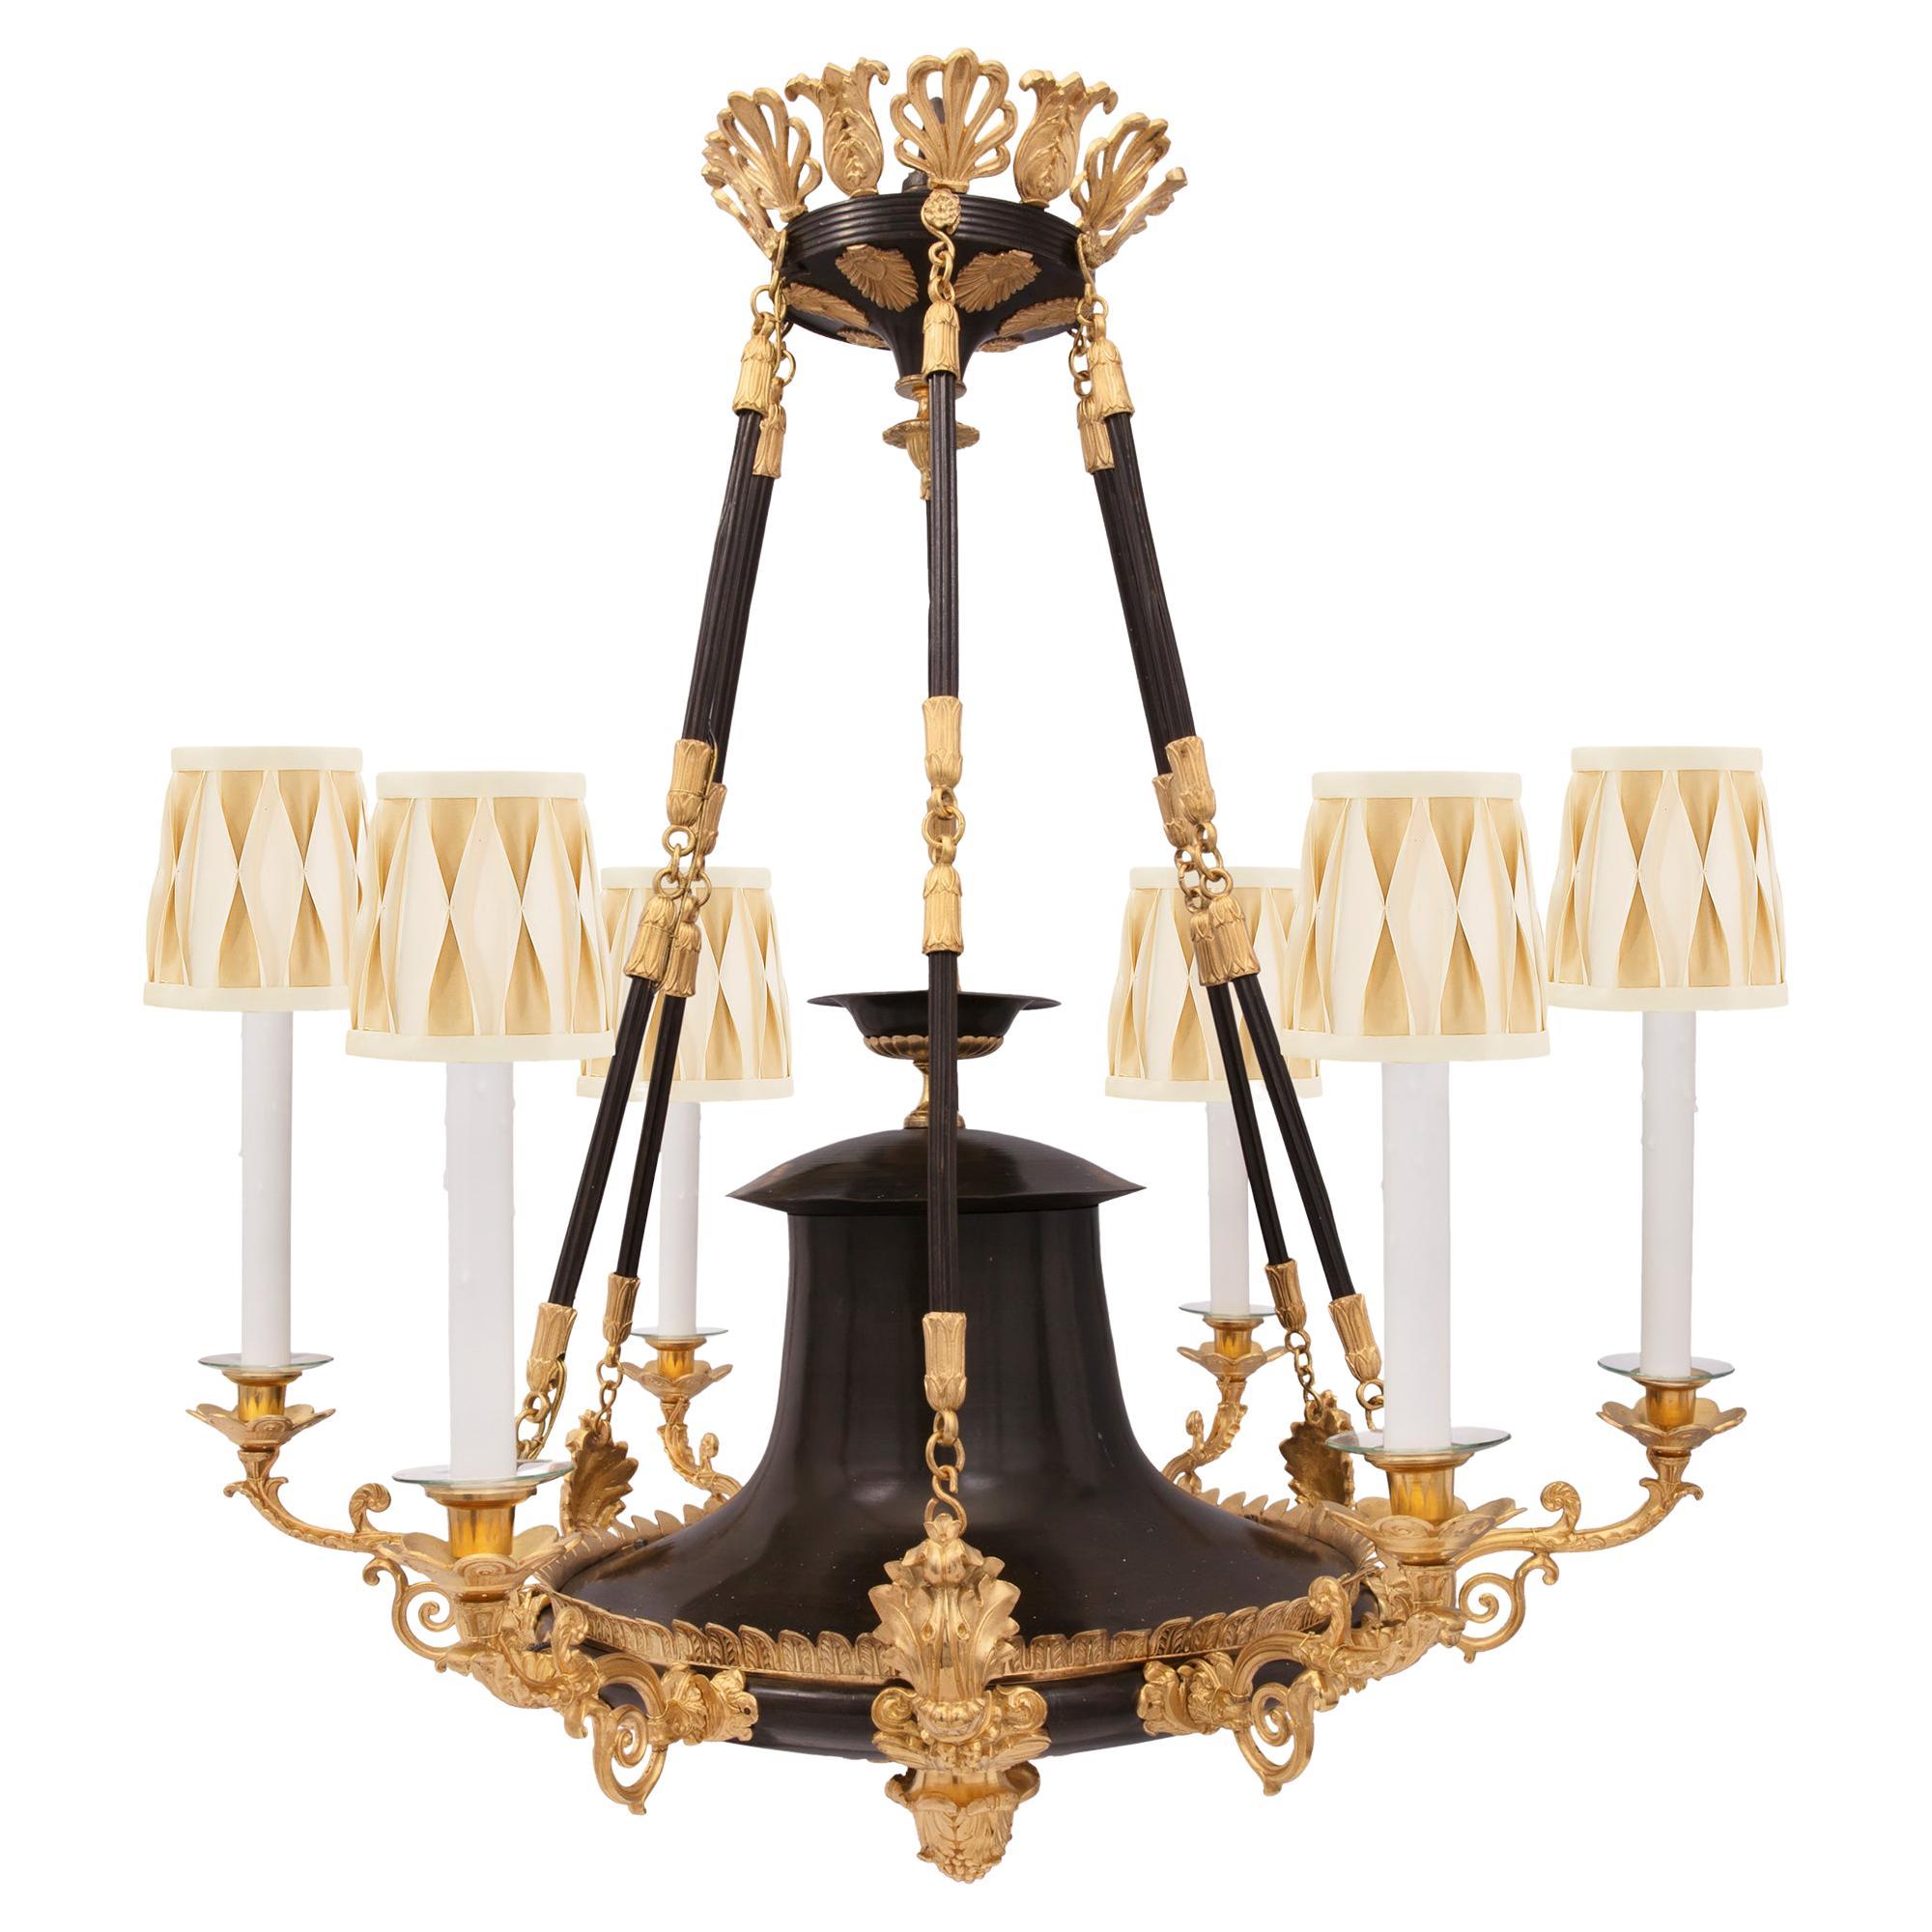 French 19th Century Neoclassical Style Patinated Bronze and Ormolu Chandelier